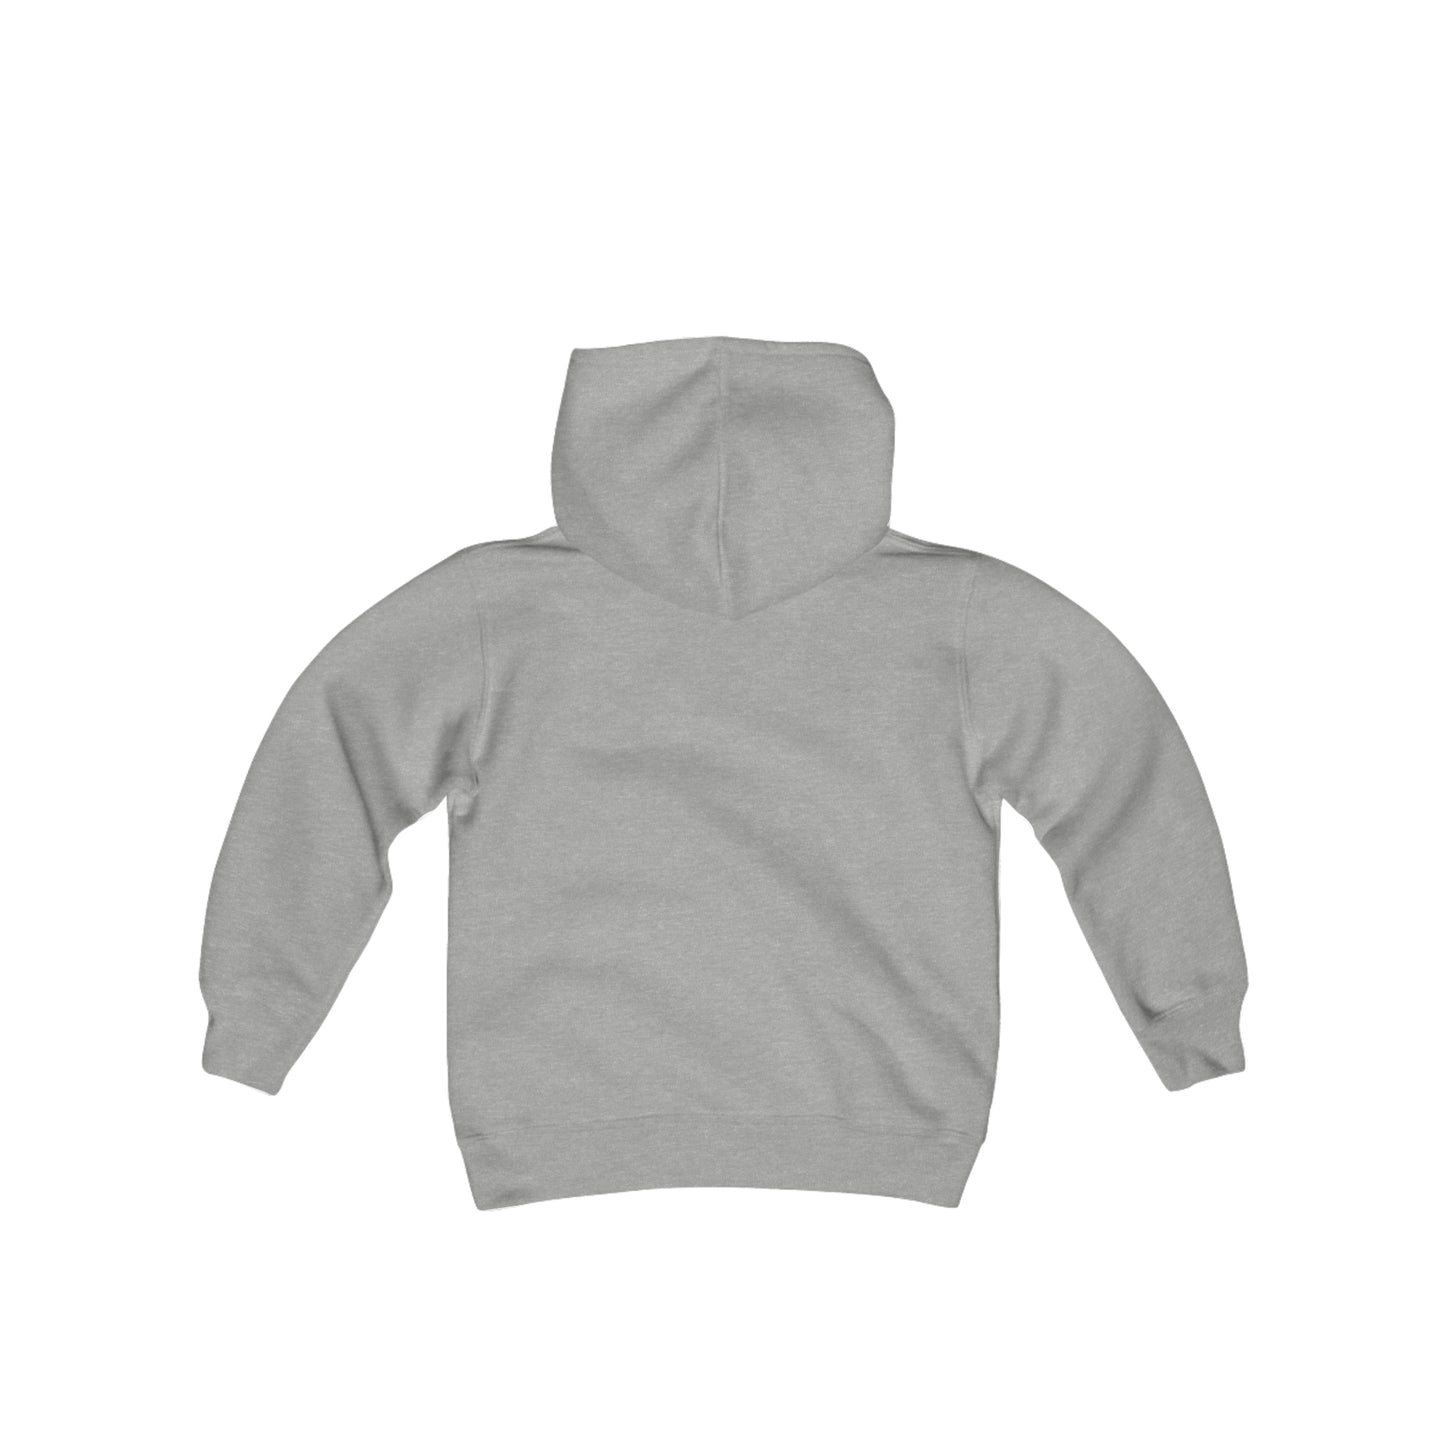 Youth Heavy Blend Hooded Sweatshirt  By Flavor's Upscale